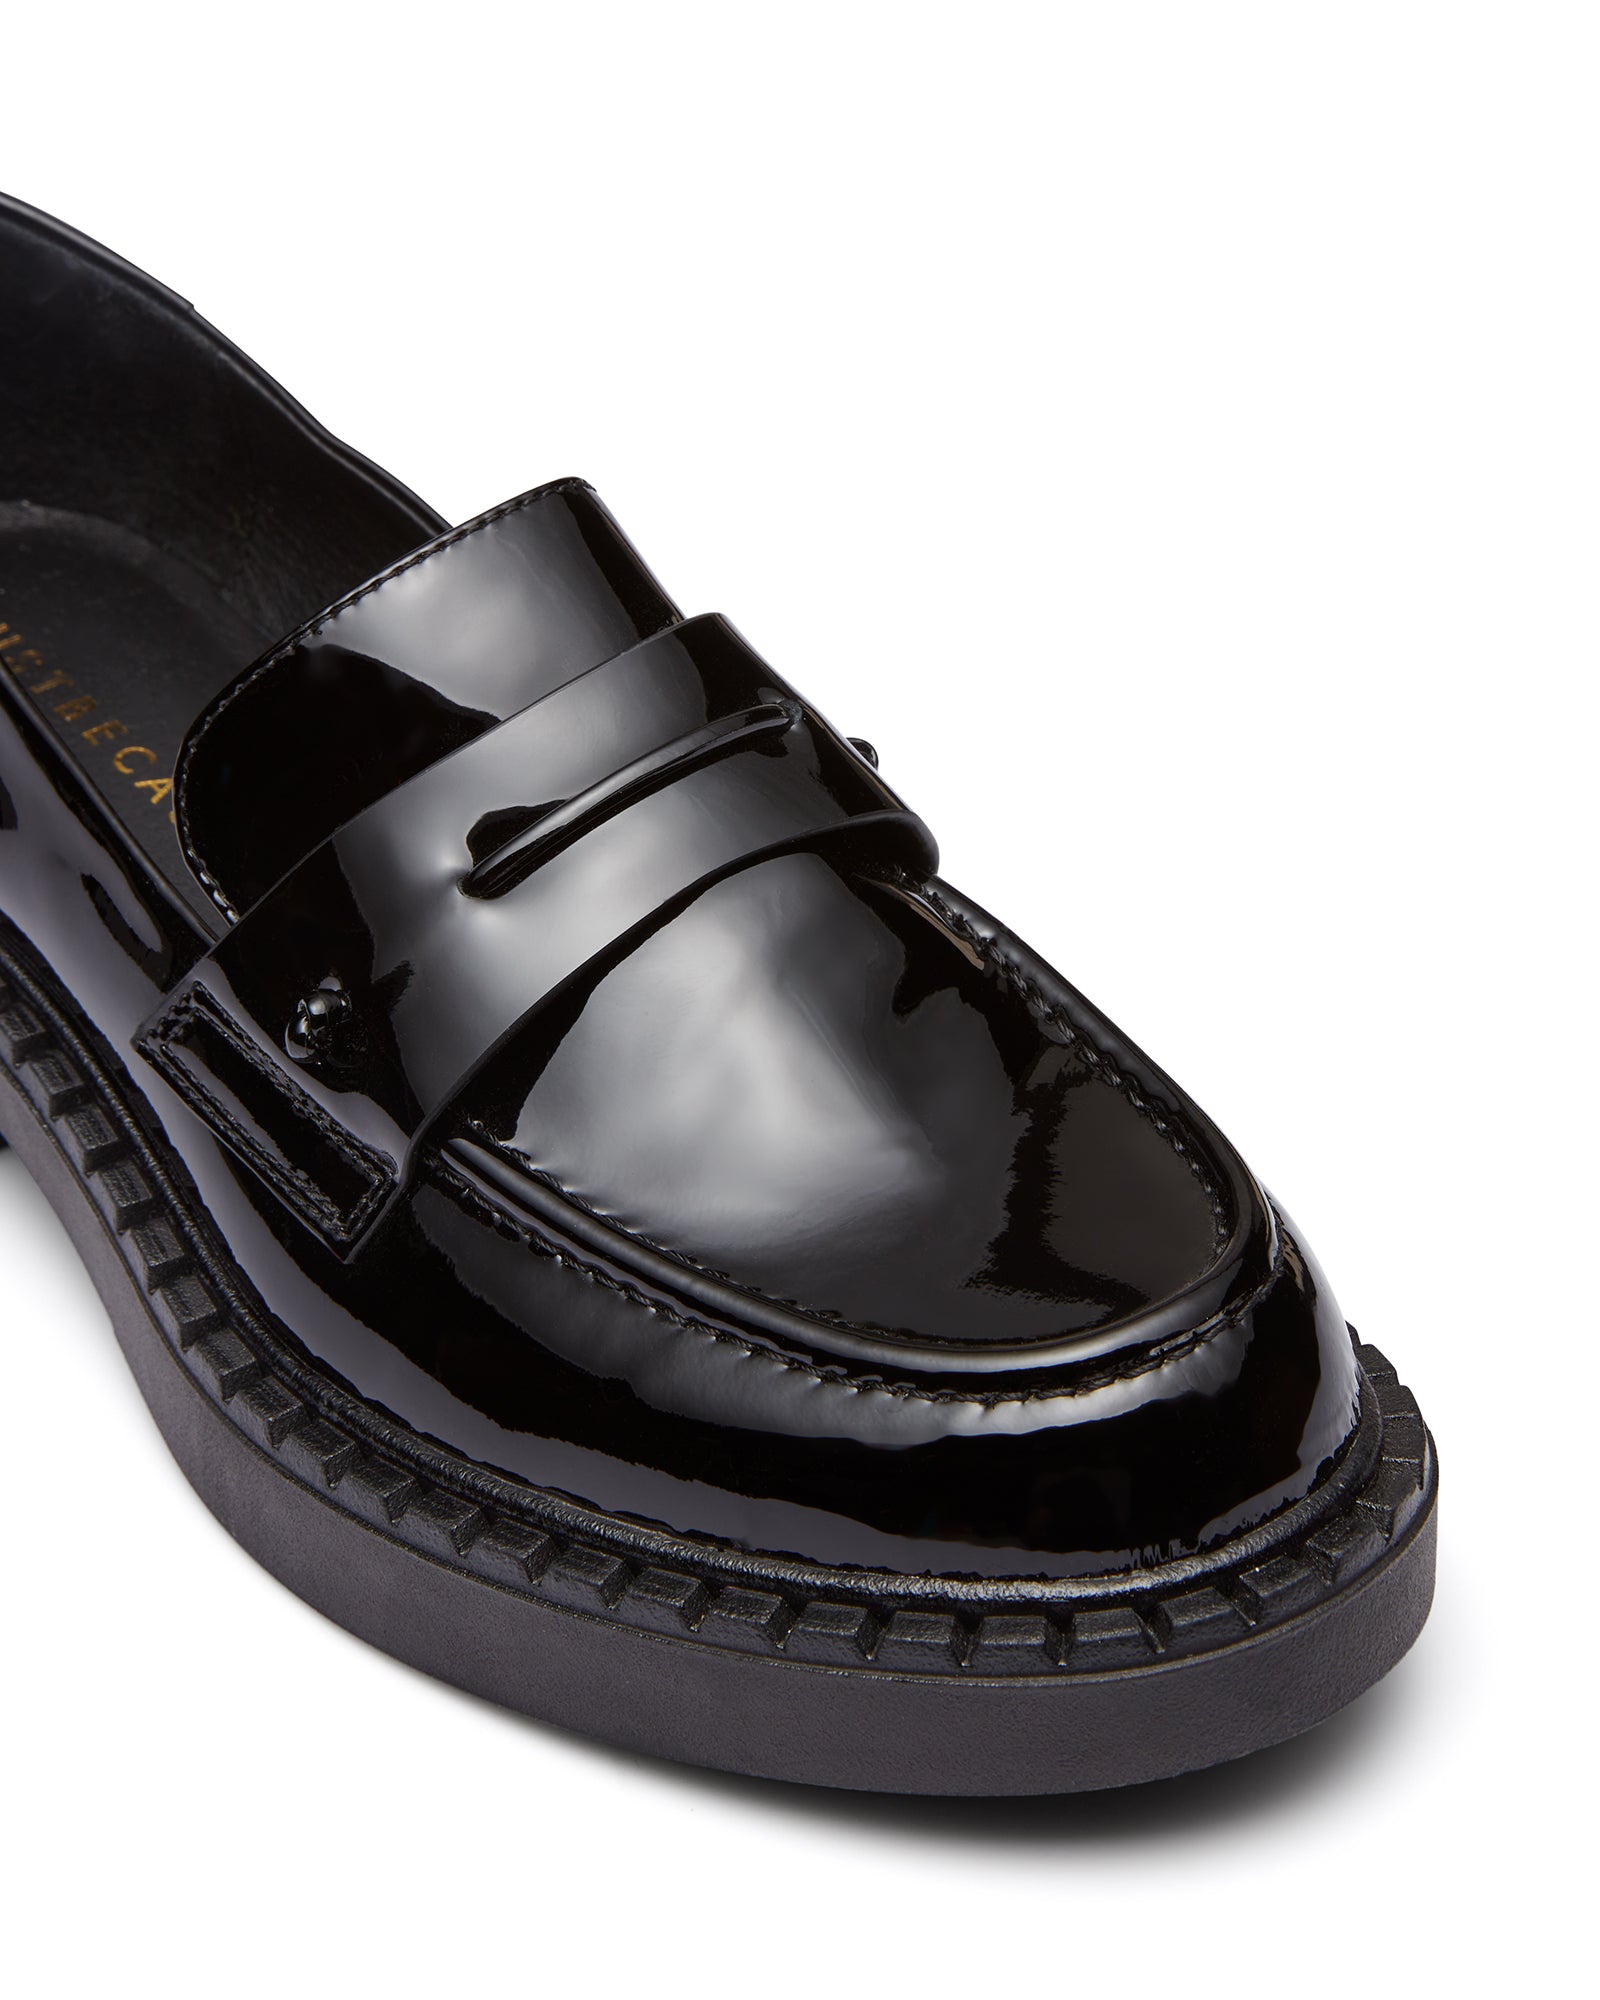 Just Because Shoes Axel Black Patent | Women's Leather Loafers | Flats | Slip On